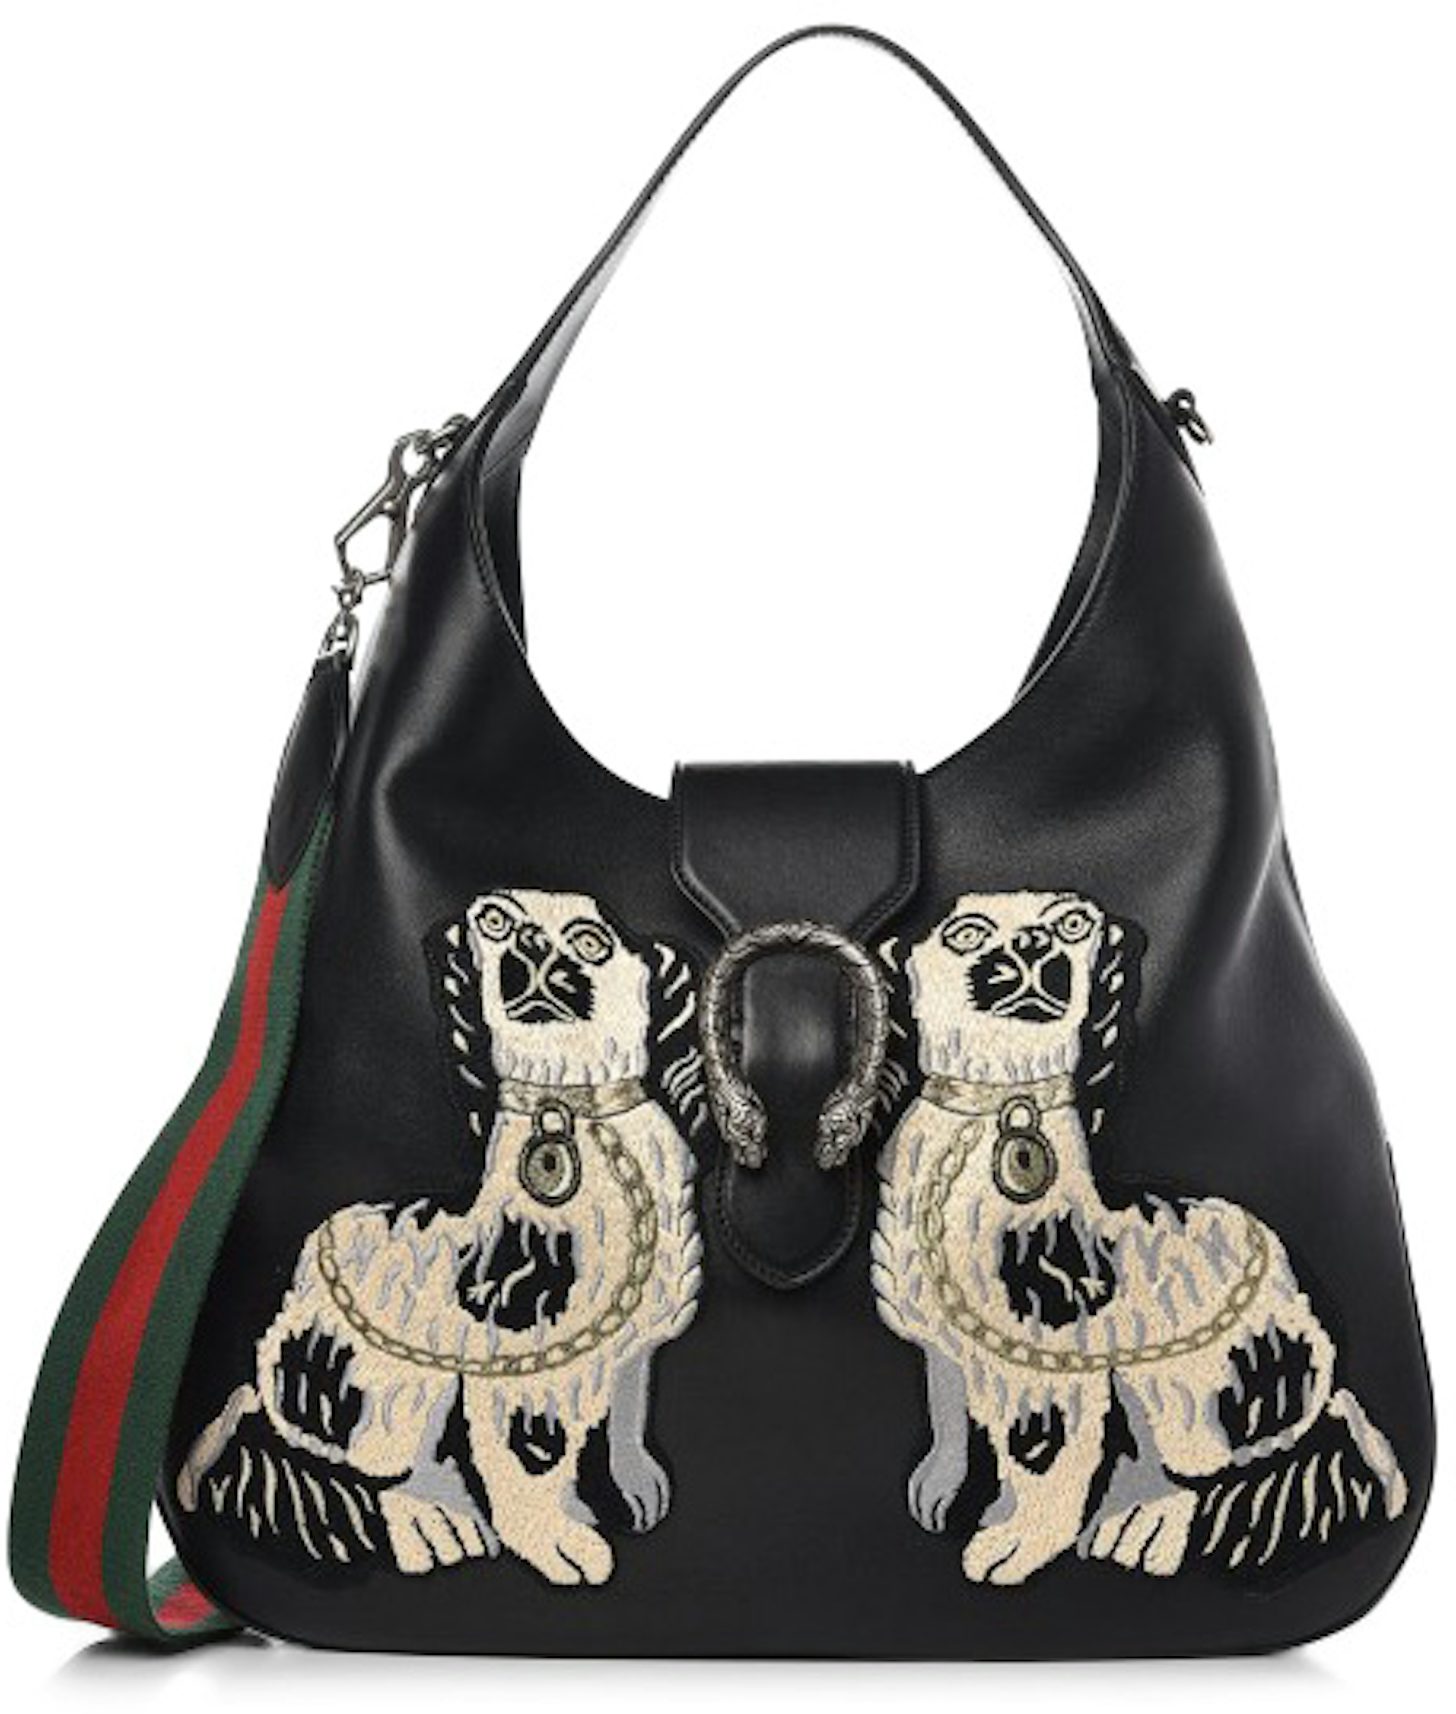 Gucci Dog Embroidered Extra Large Dionysus Hobo - Black Hobos